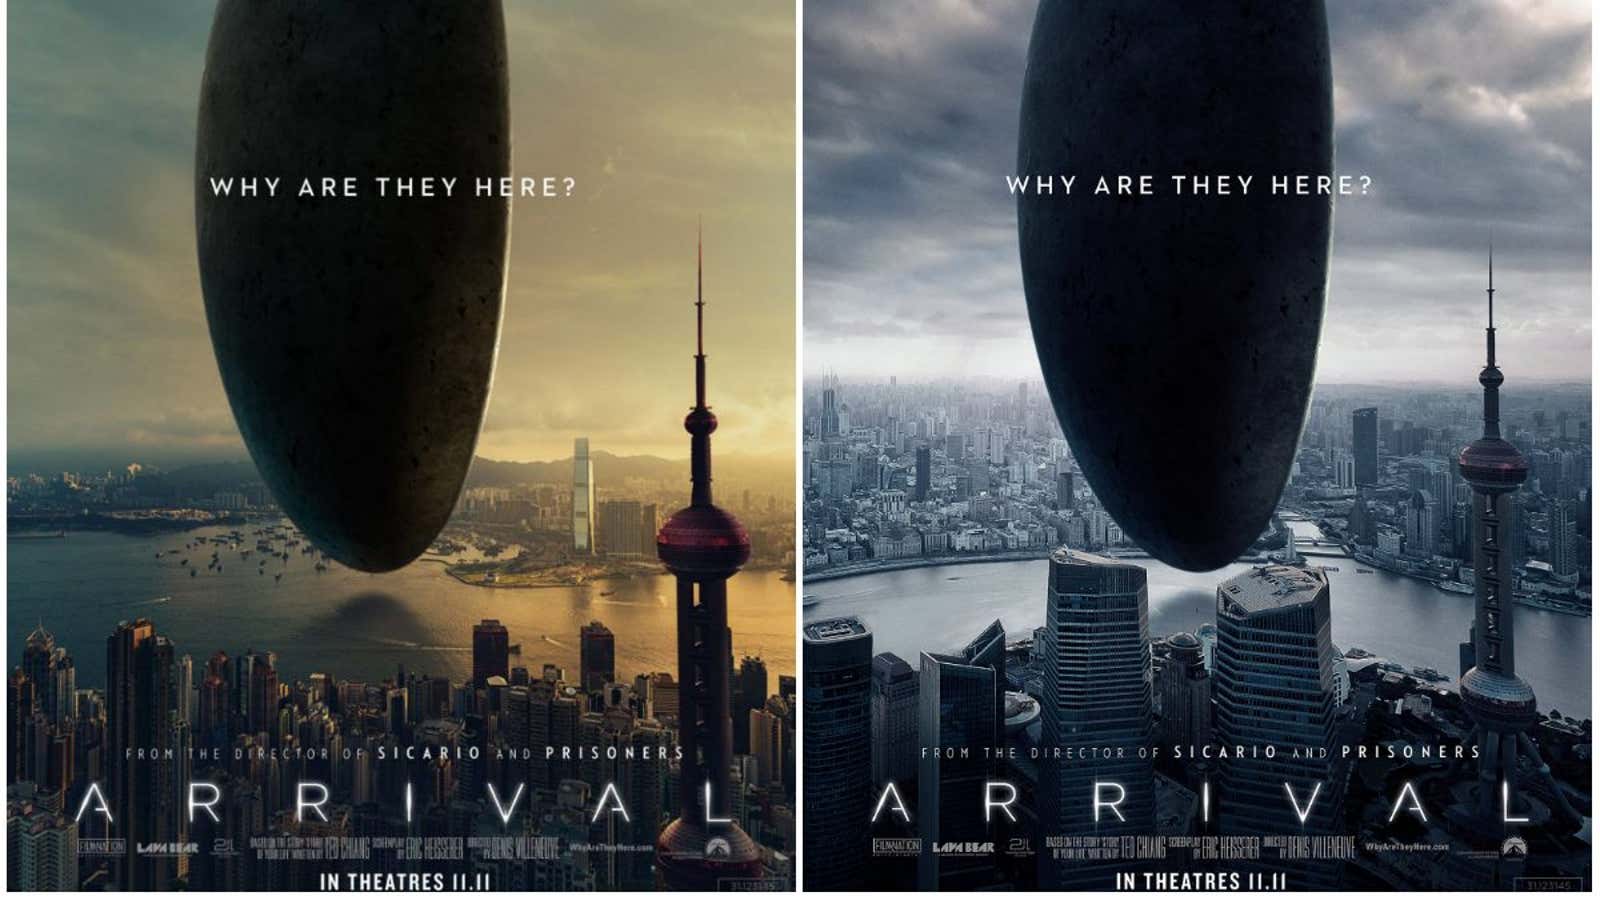 One of these has the Oriental Pearl Tower in the correct city.